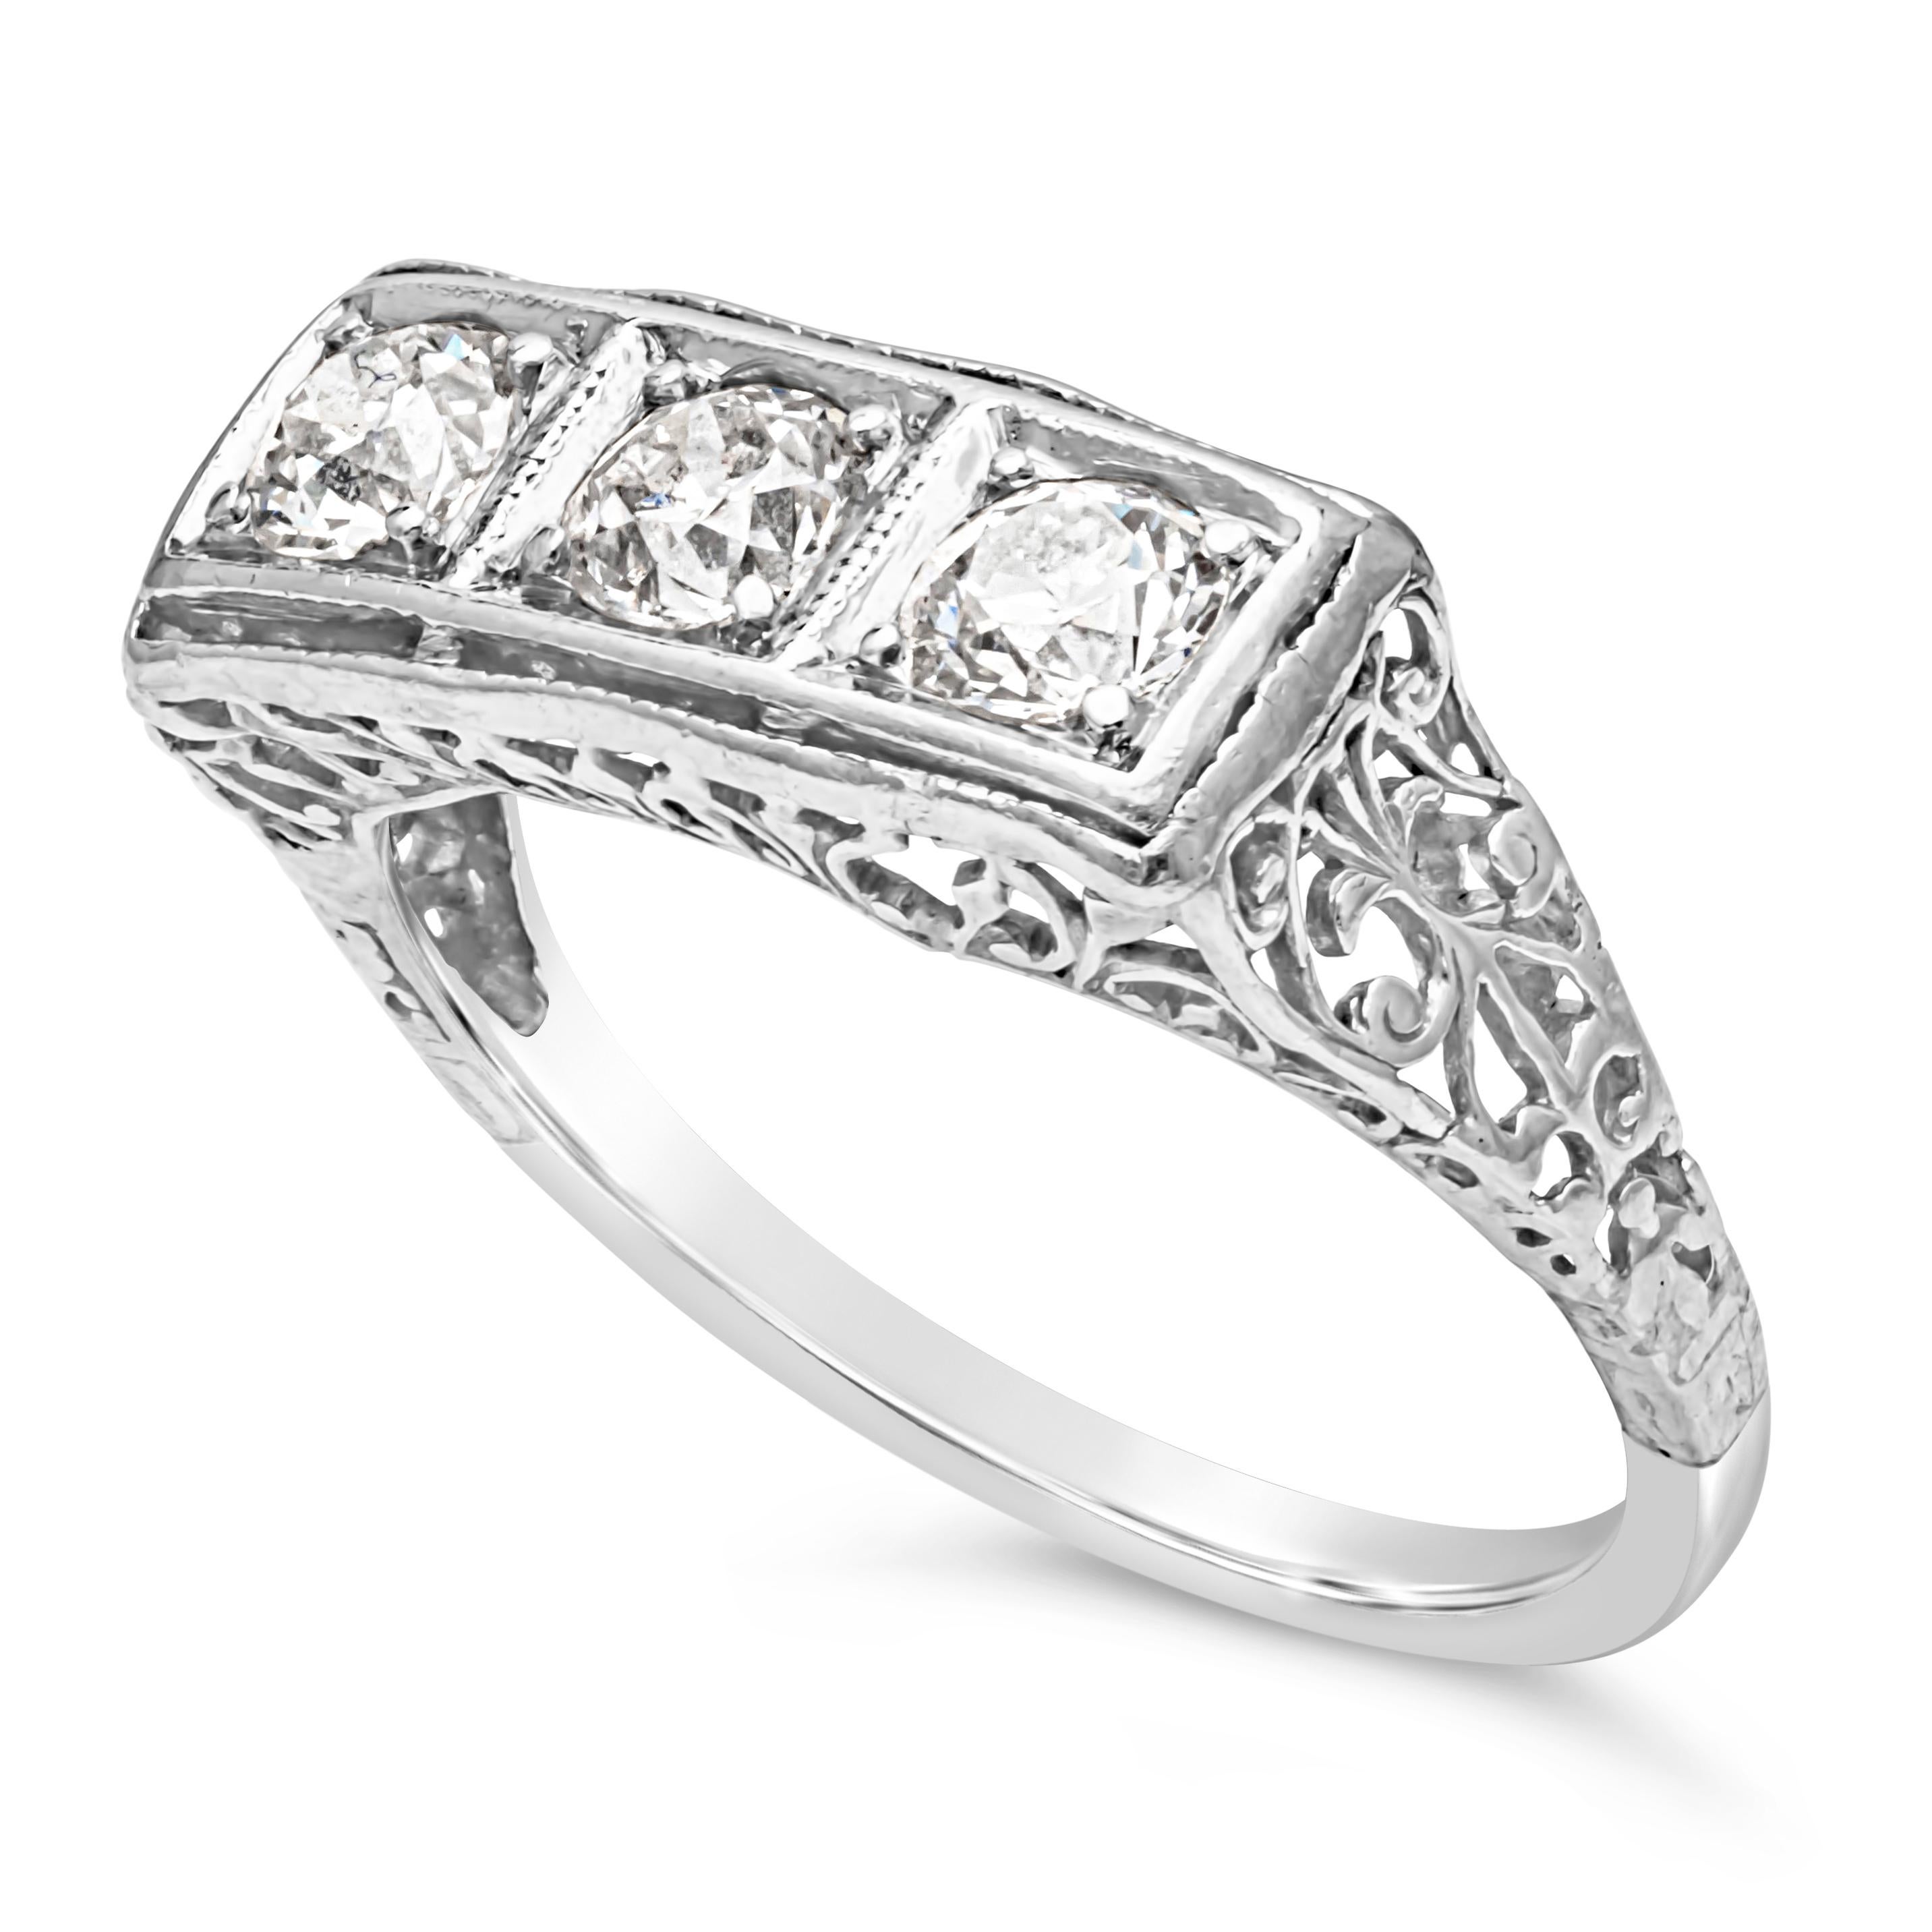 Late Victorian 0.63 Carats Total Old European Cut Diamond Antique Style Wedding Band For Sale